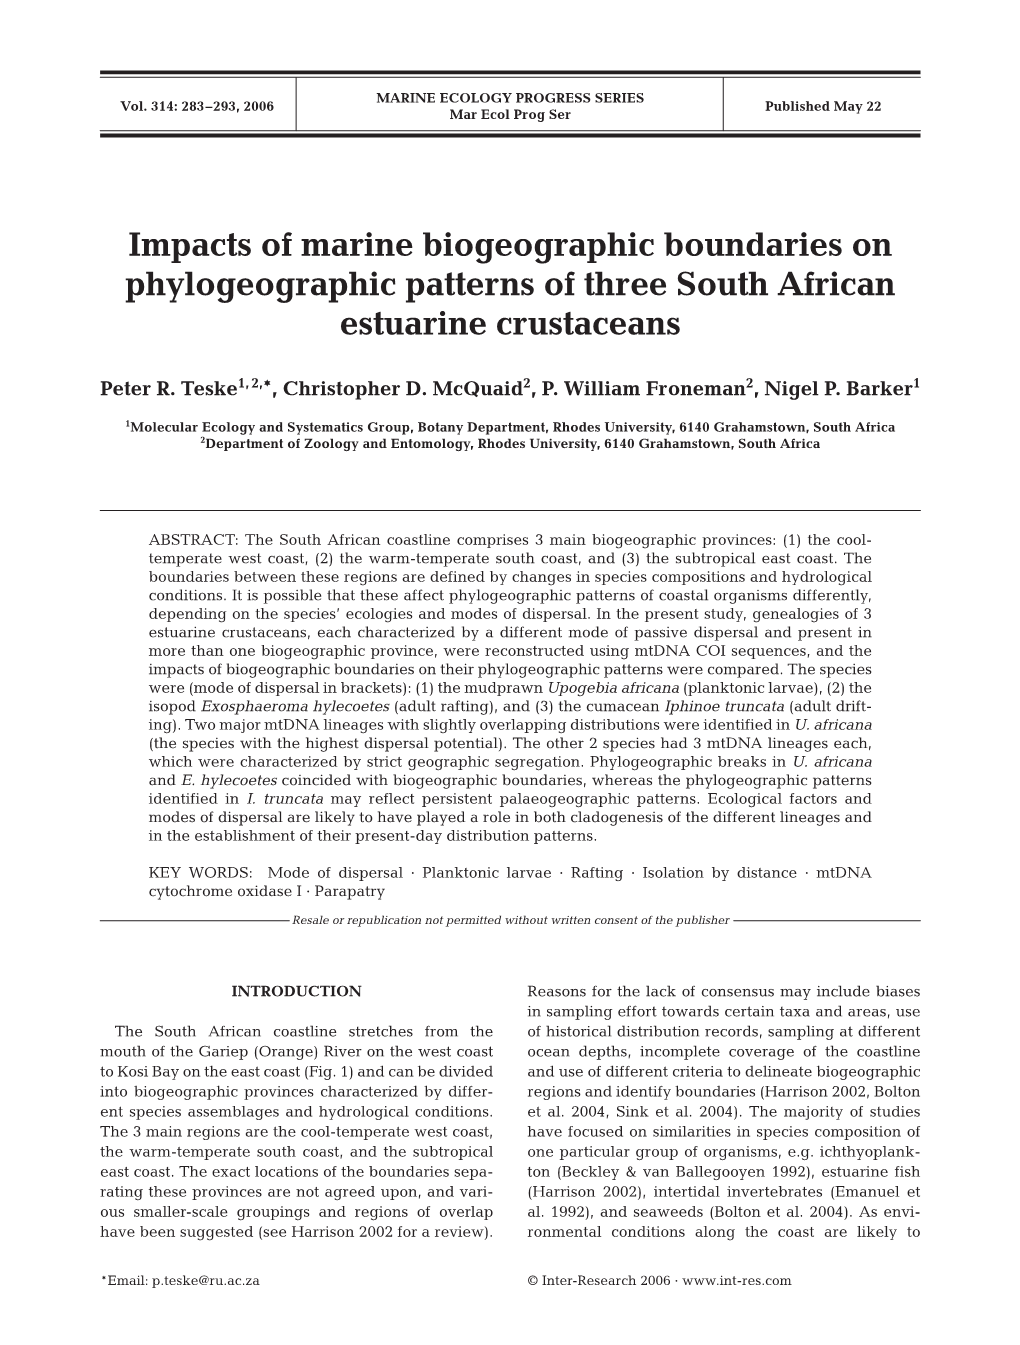 Impacts of Marine Biogeographic Boundaries on Phylogeographic Patterns of Three South African Estuarine Crustaceans